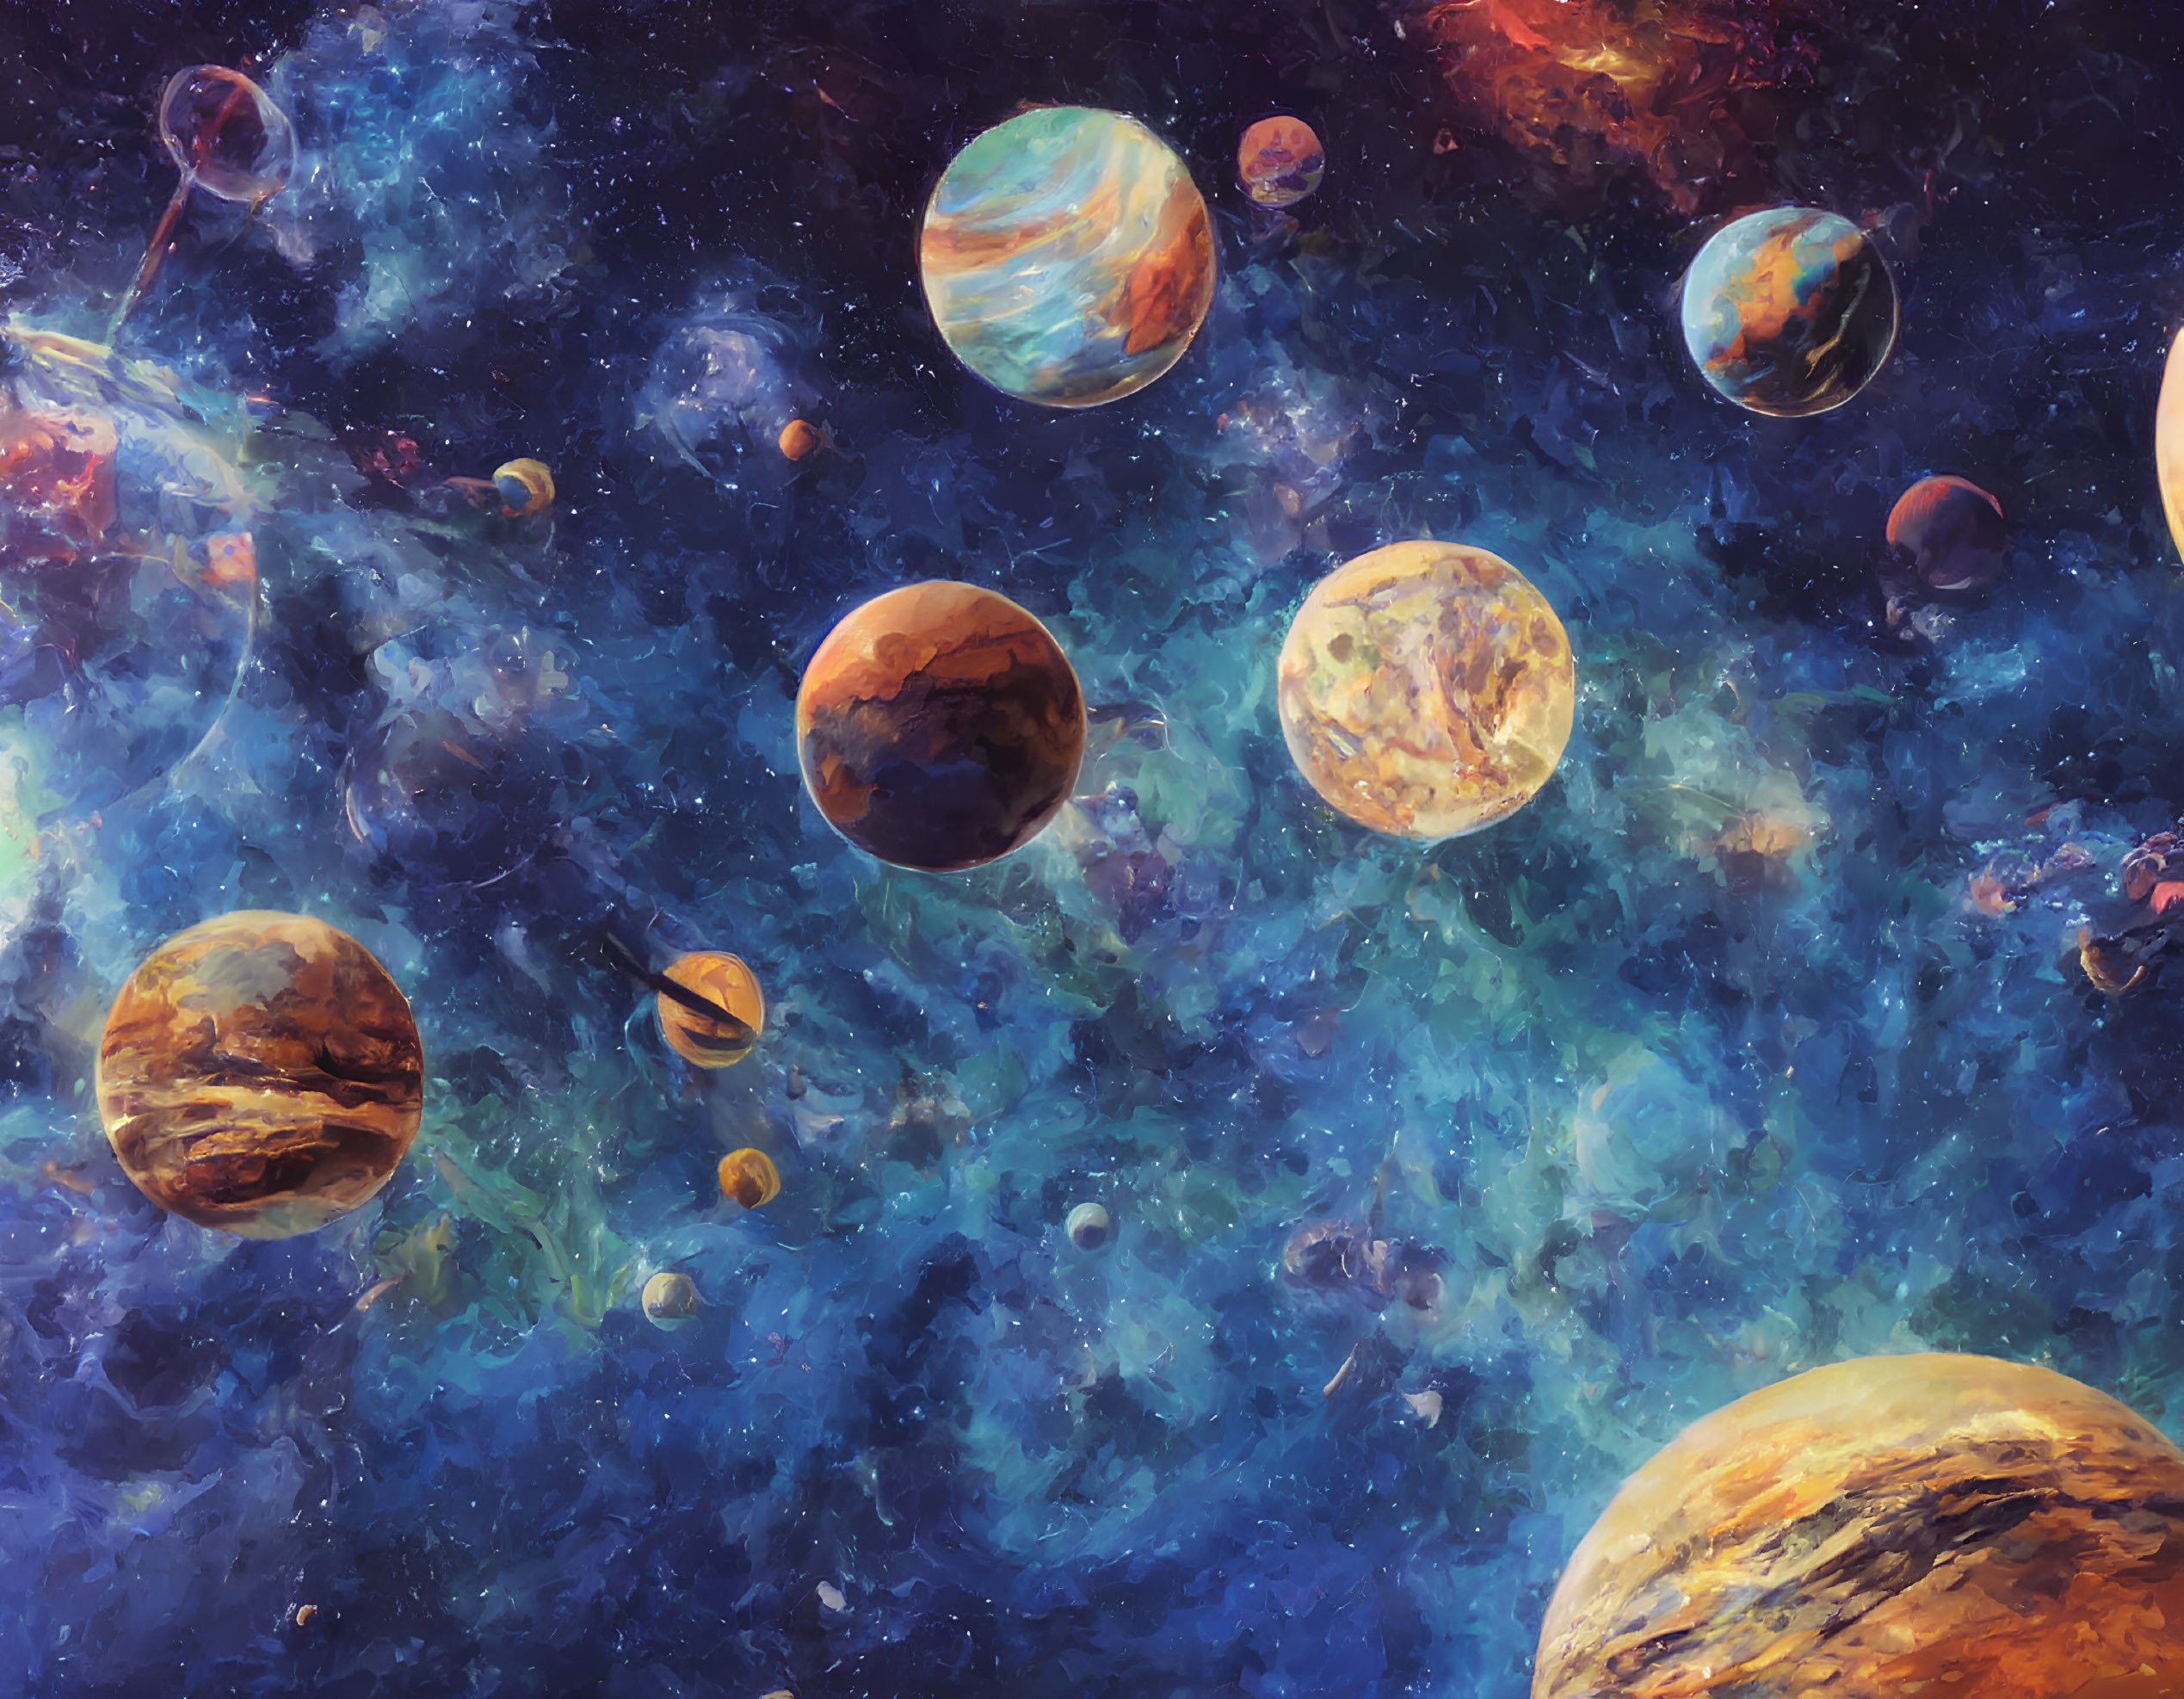 Colorful Cosmic Scene with Multiple Planets in Starry Nebula